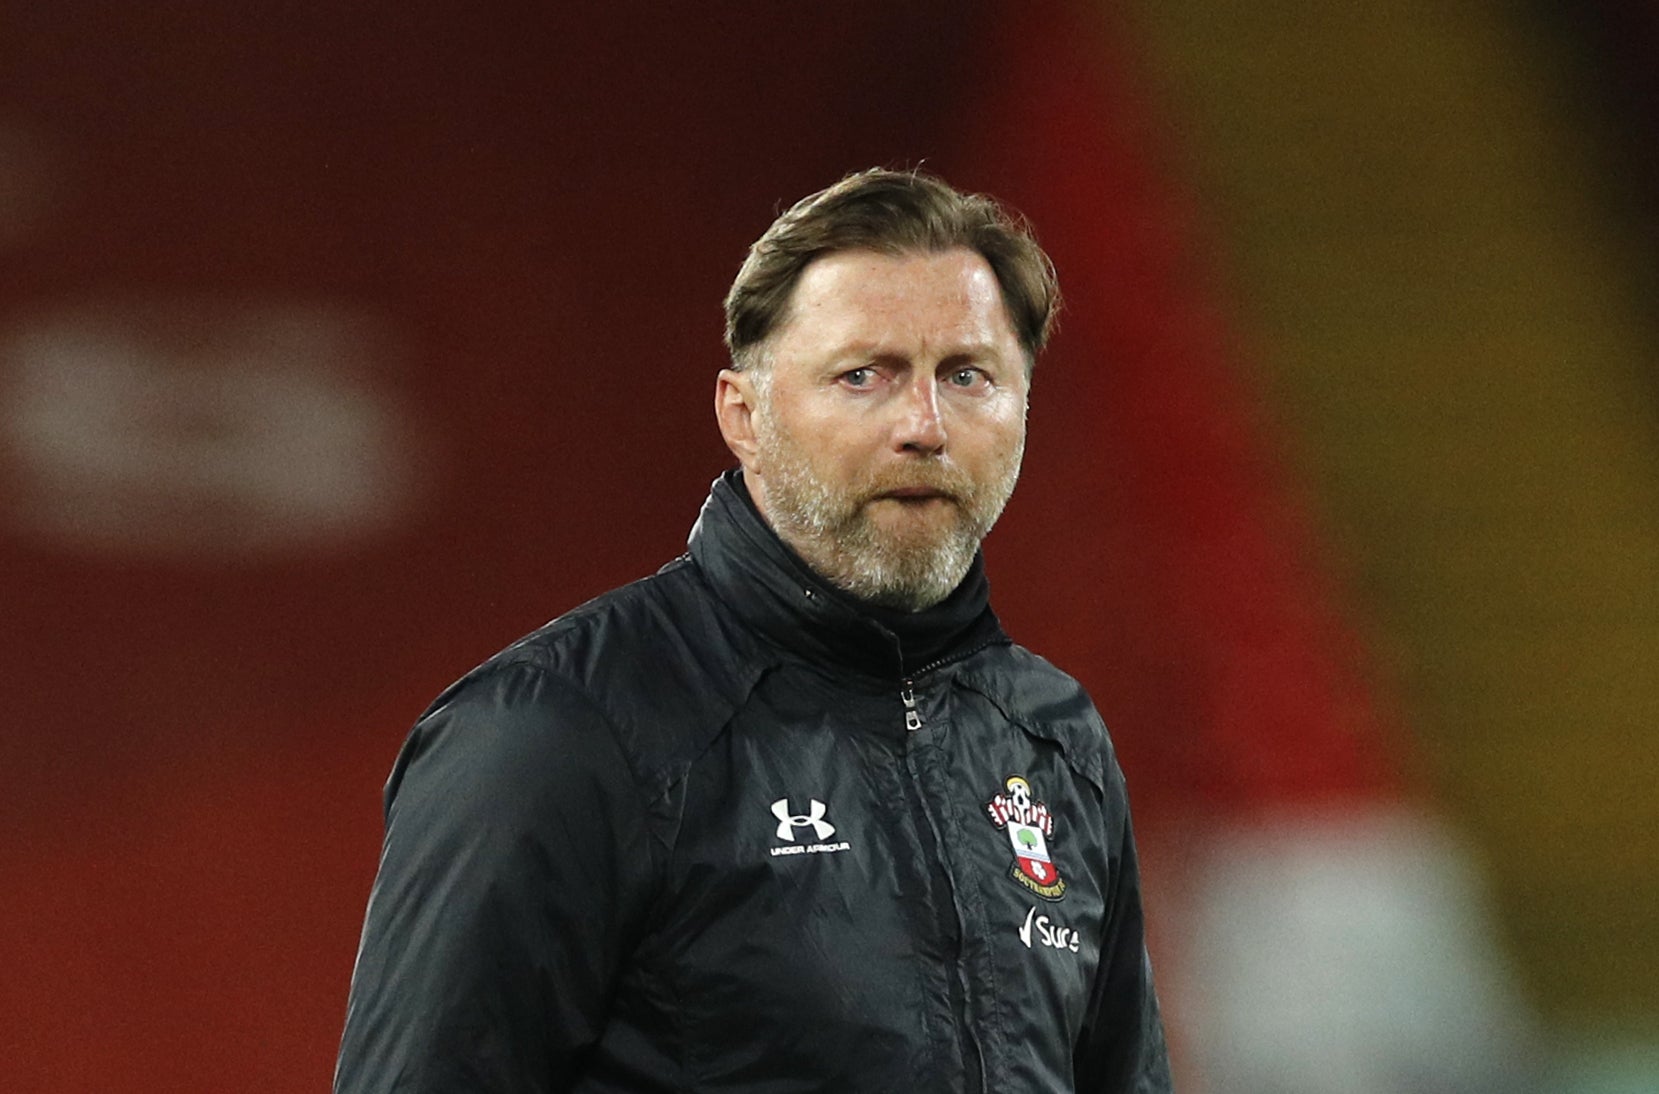 Ralph Hasenhuttl said he was pleased with how all his strikers have performed this season after Southampton’s 1-0 away win at Watford (Phil Noble/PA)